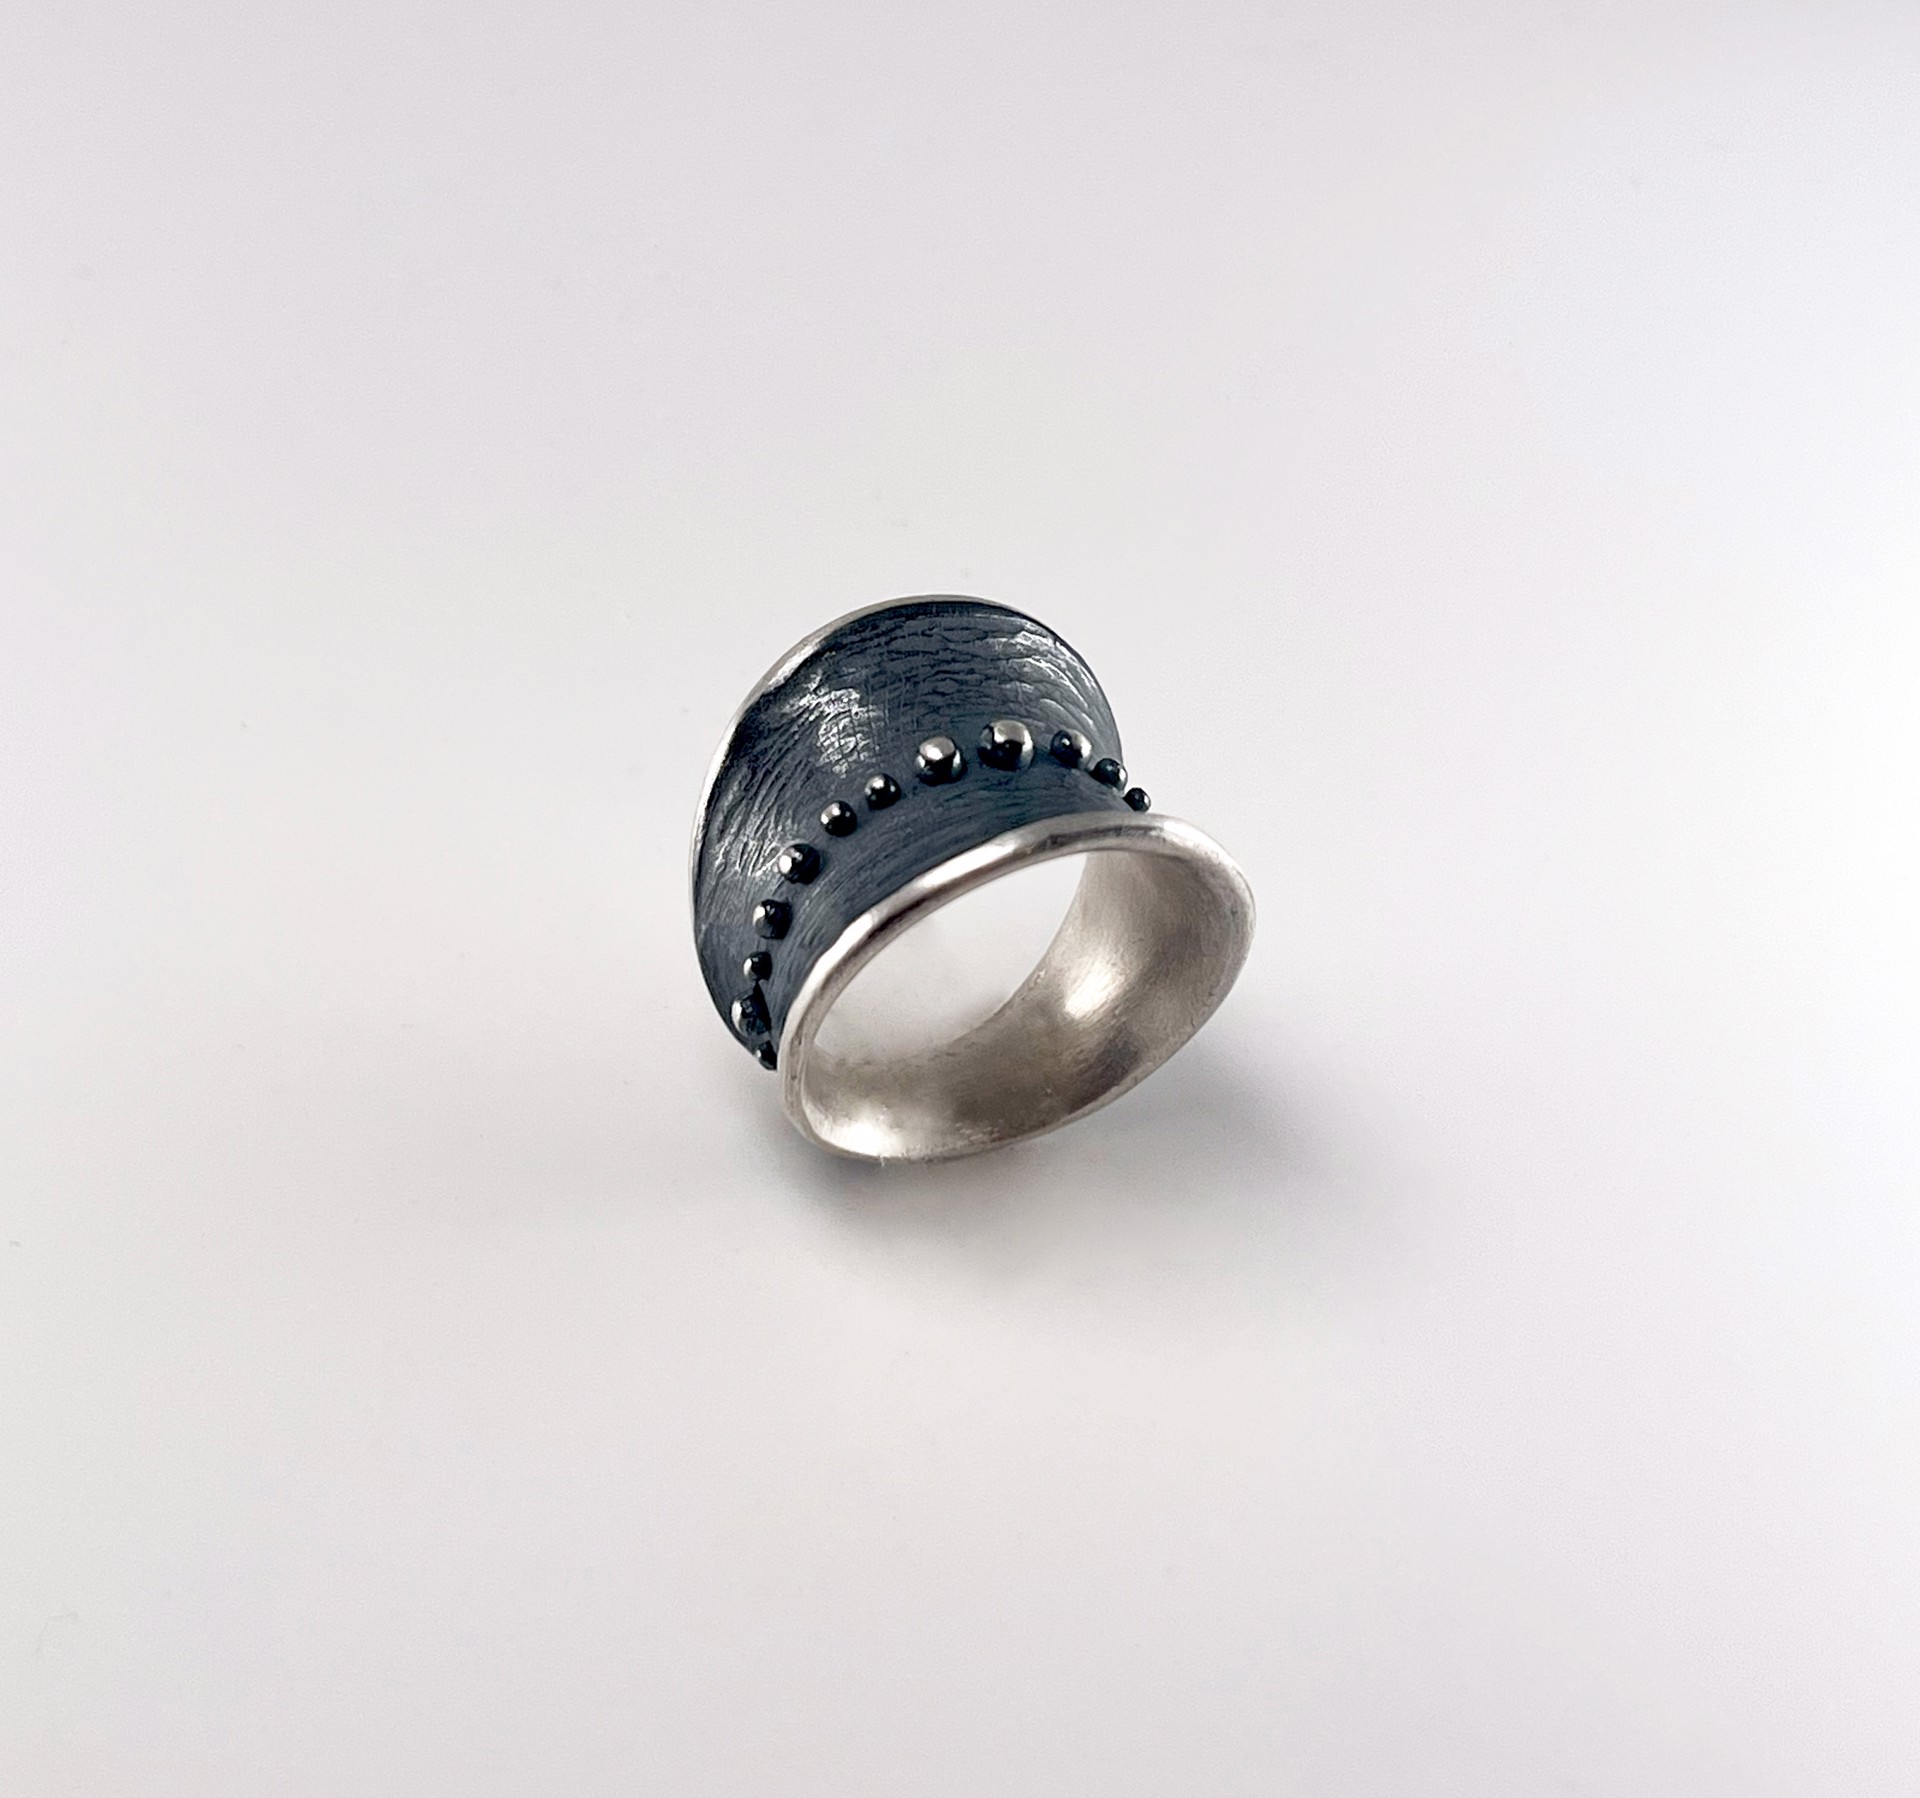 Bumpy Belted Tapered Ring by DAHLIA KANNER